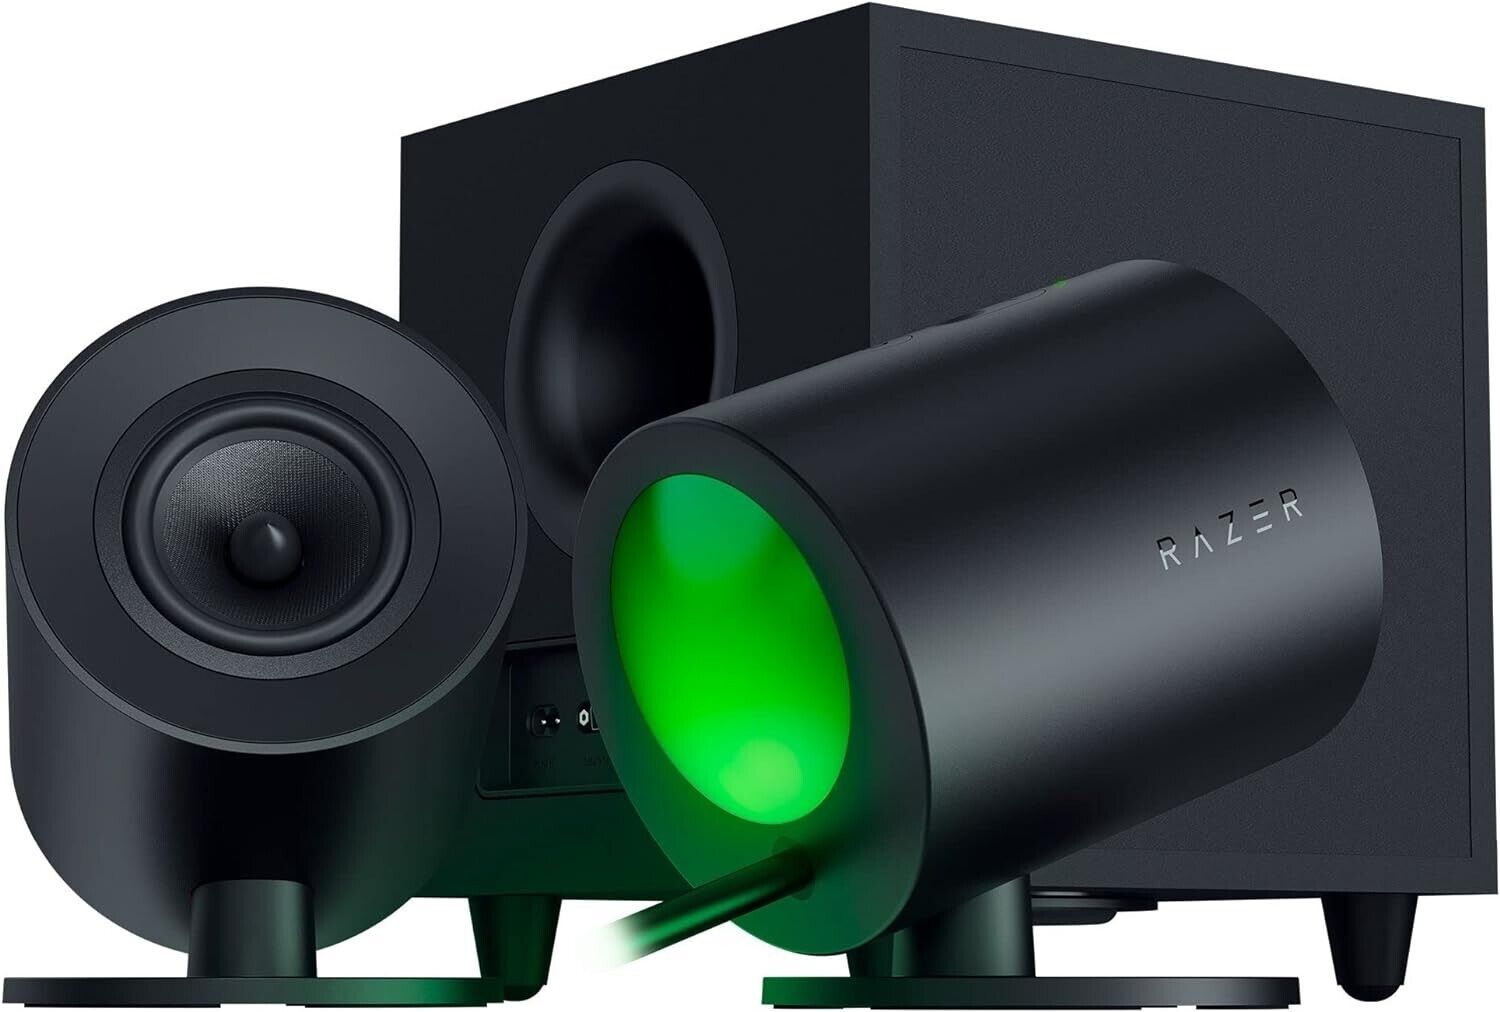 Razer Nommo V2 2.1 PC Gaming Speakers with Wired Subwoofer rz05-04750100